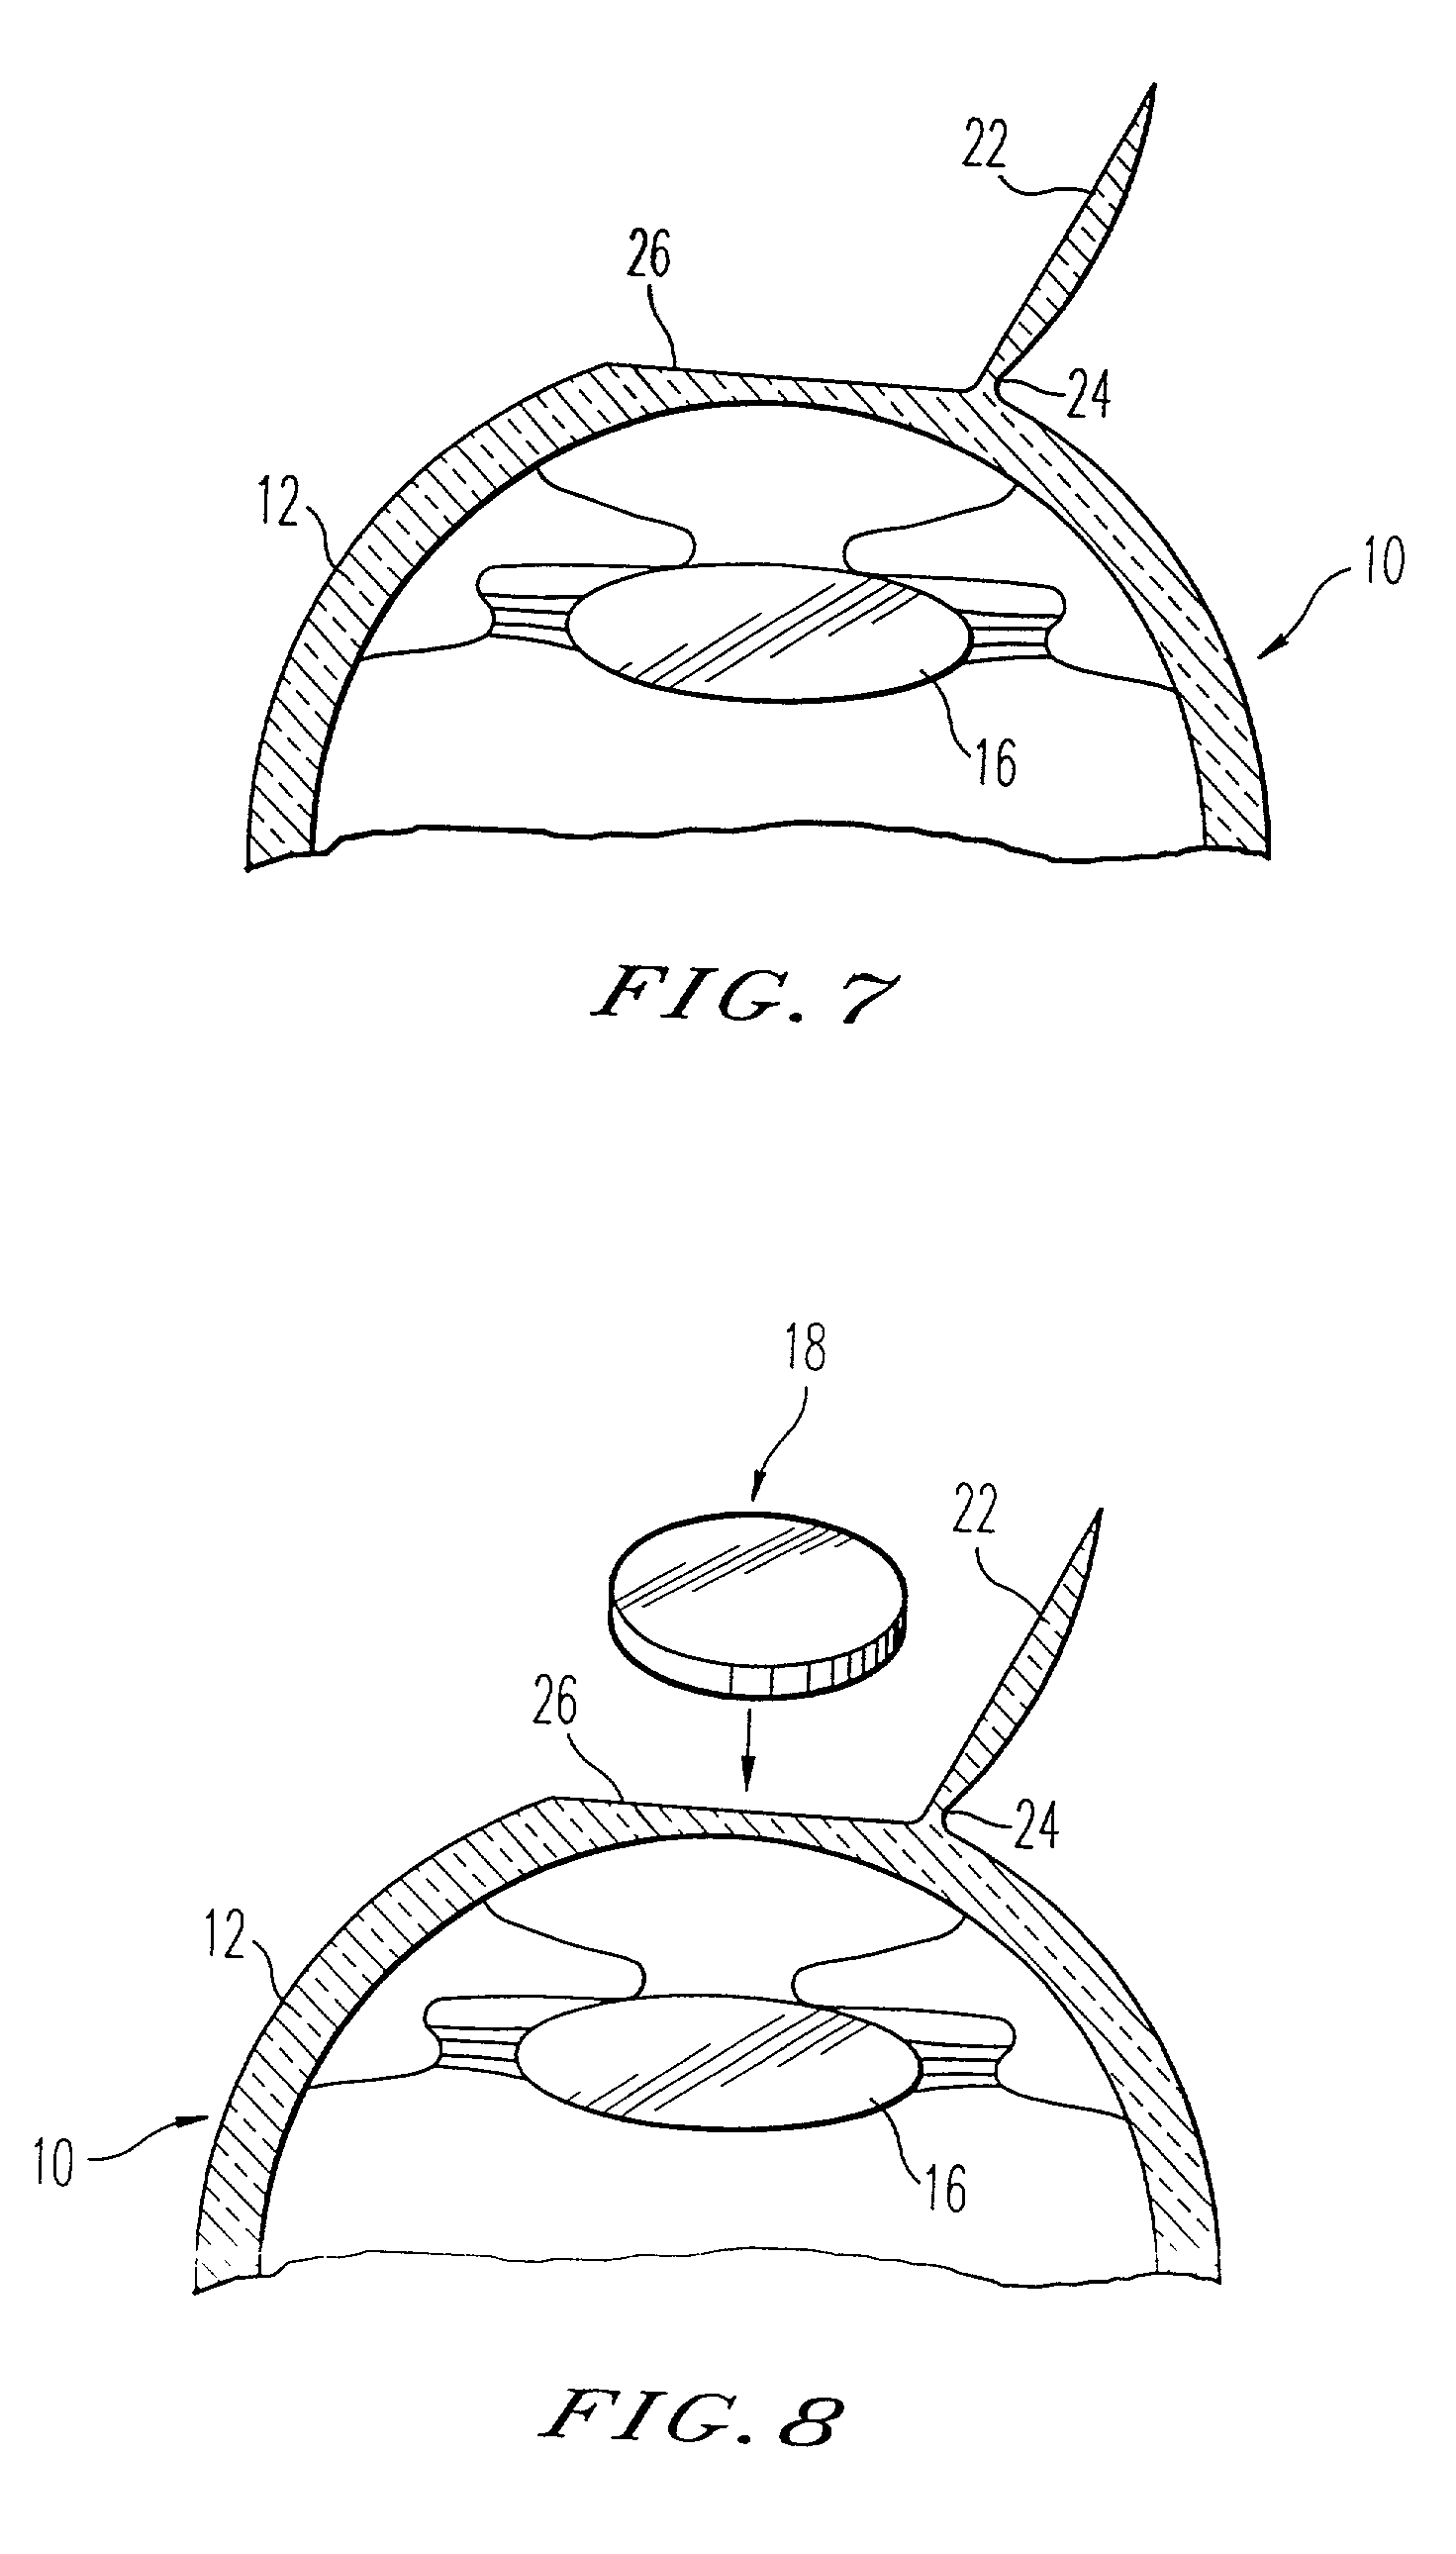 Adjustable universal implant blank for modifying corneal curvature and methods of modifying corneal curvature therewith